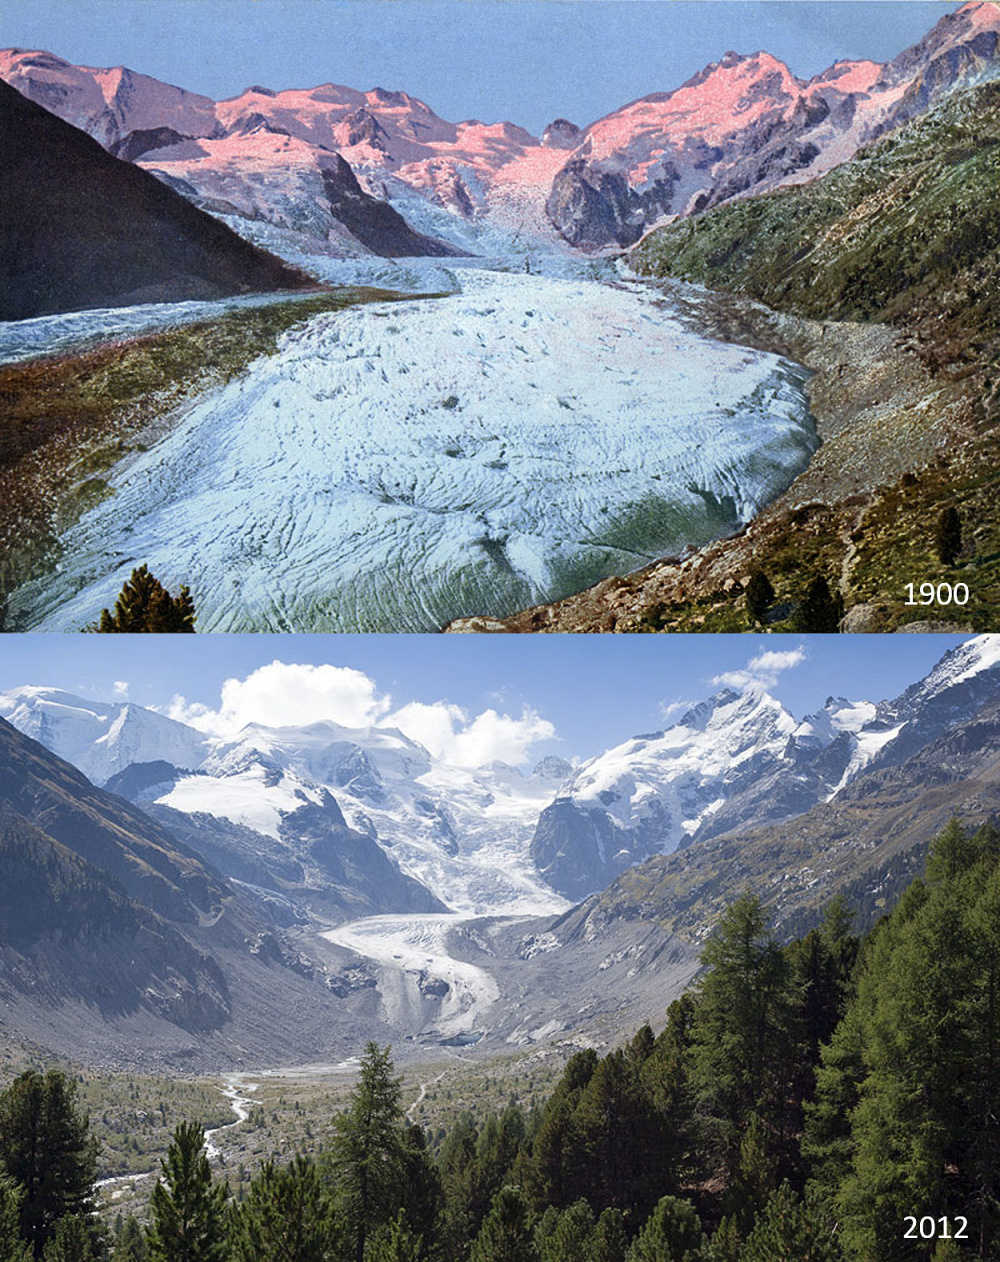 A comparison of pictures of the Morteratsch Glacier from 1900 to 2012 